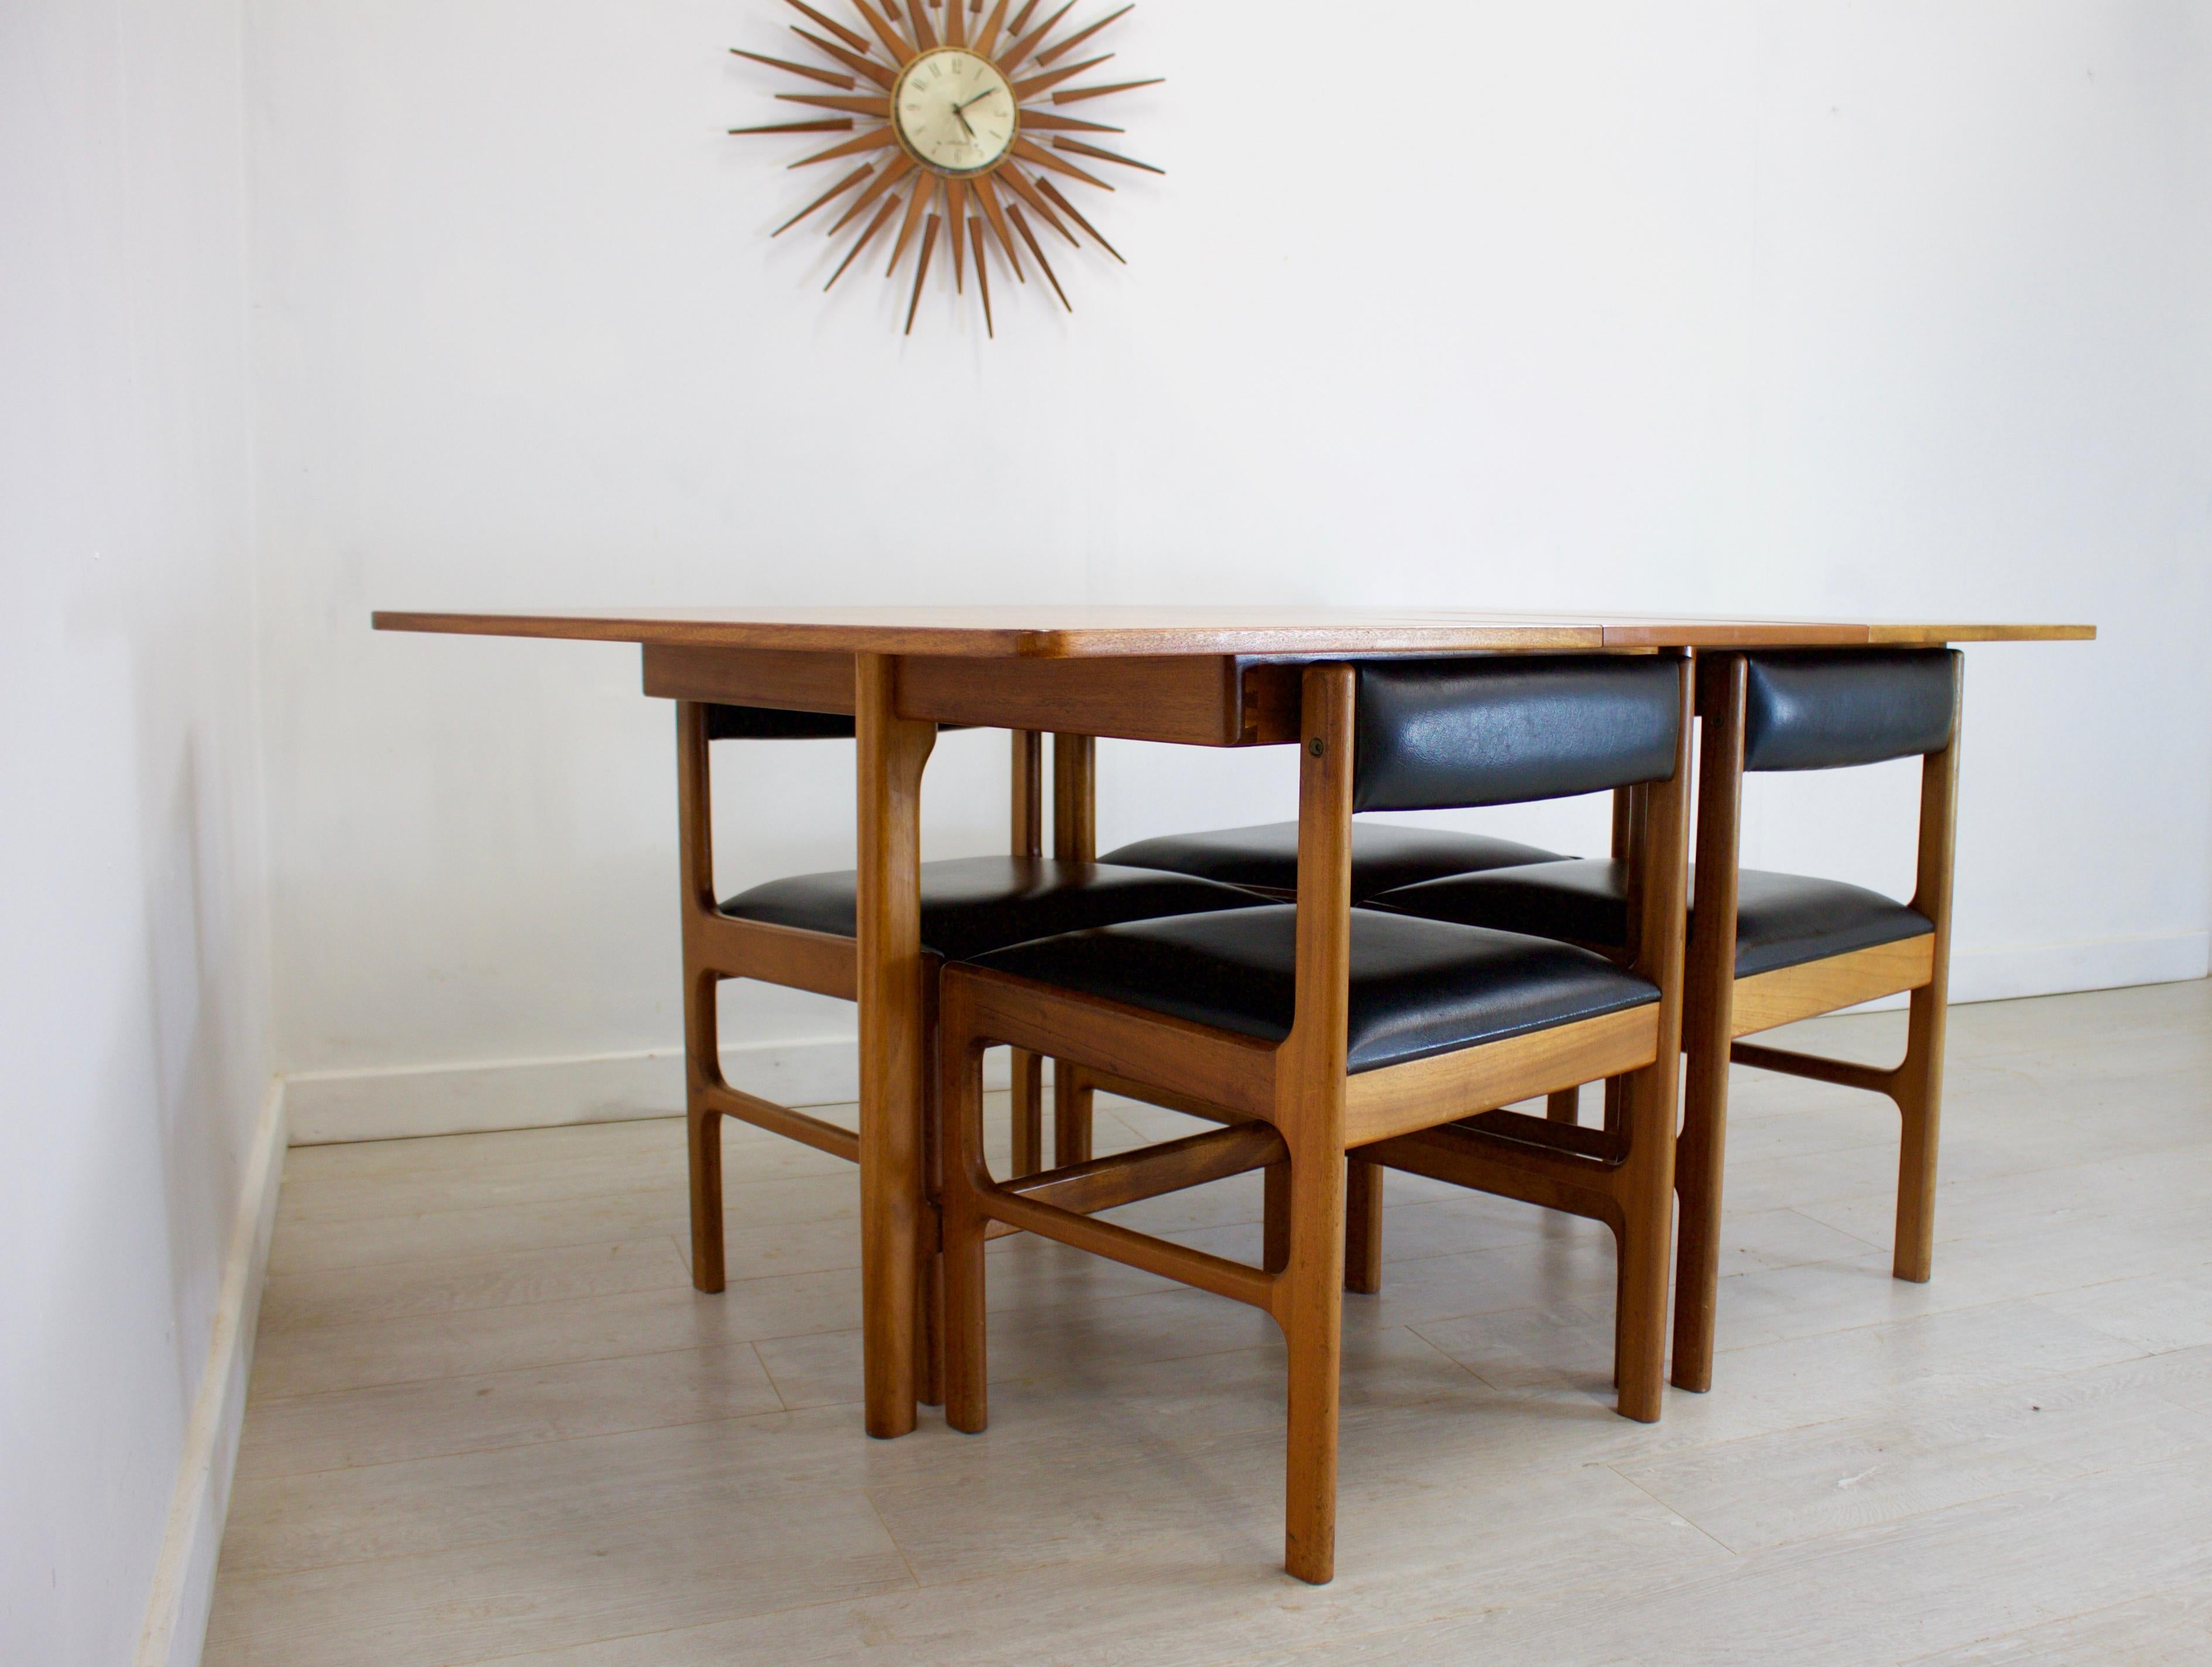 British Midcentury Teak Extendable Dining Table with 4 Chairs from McIntosh, 1960s